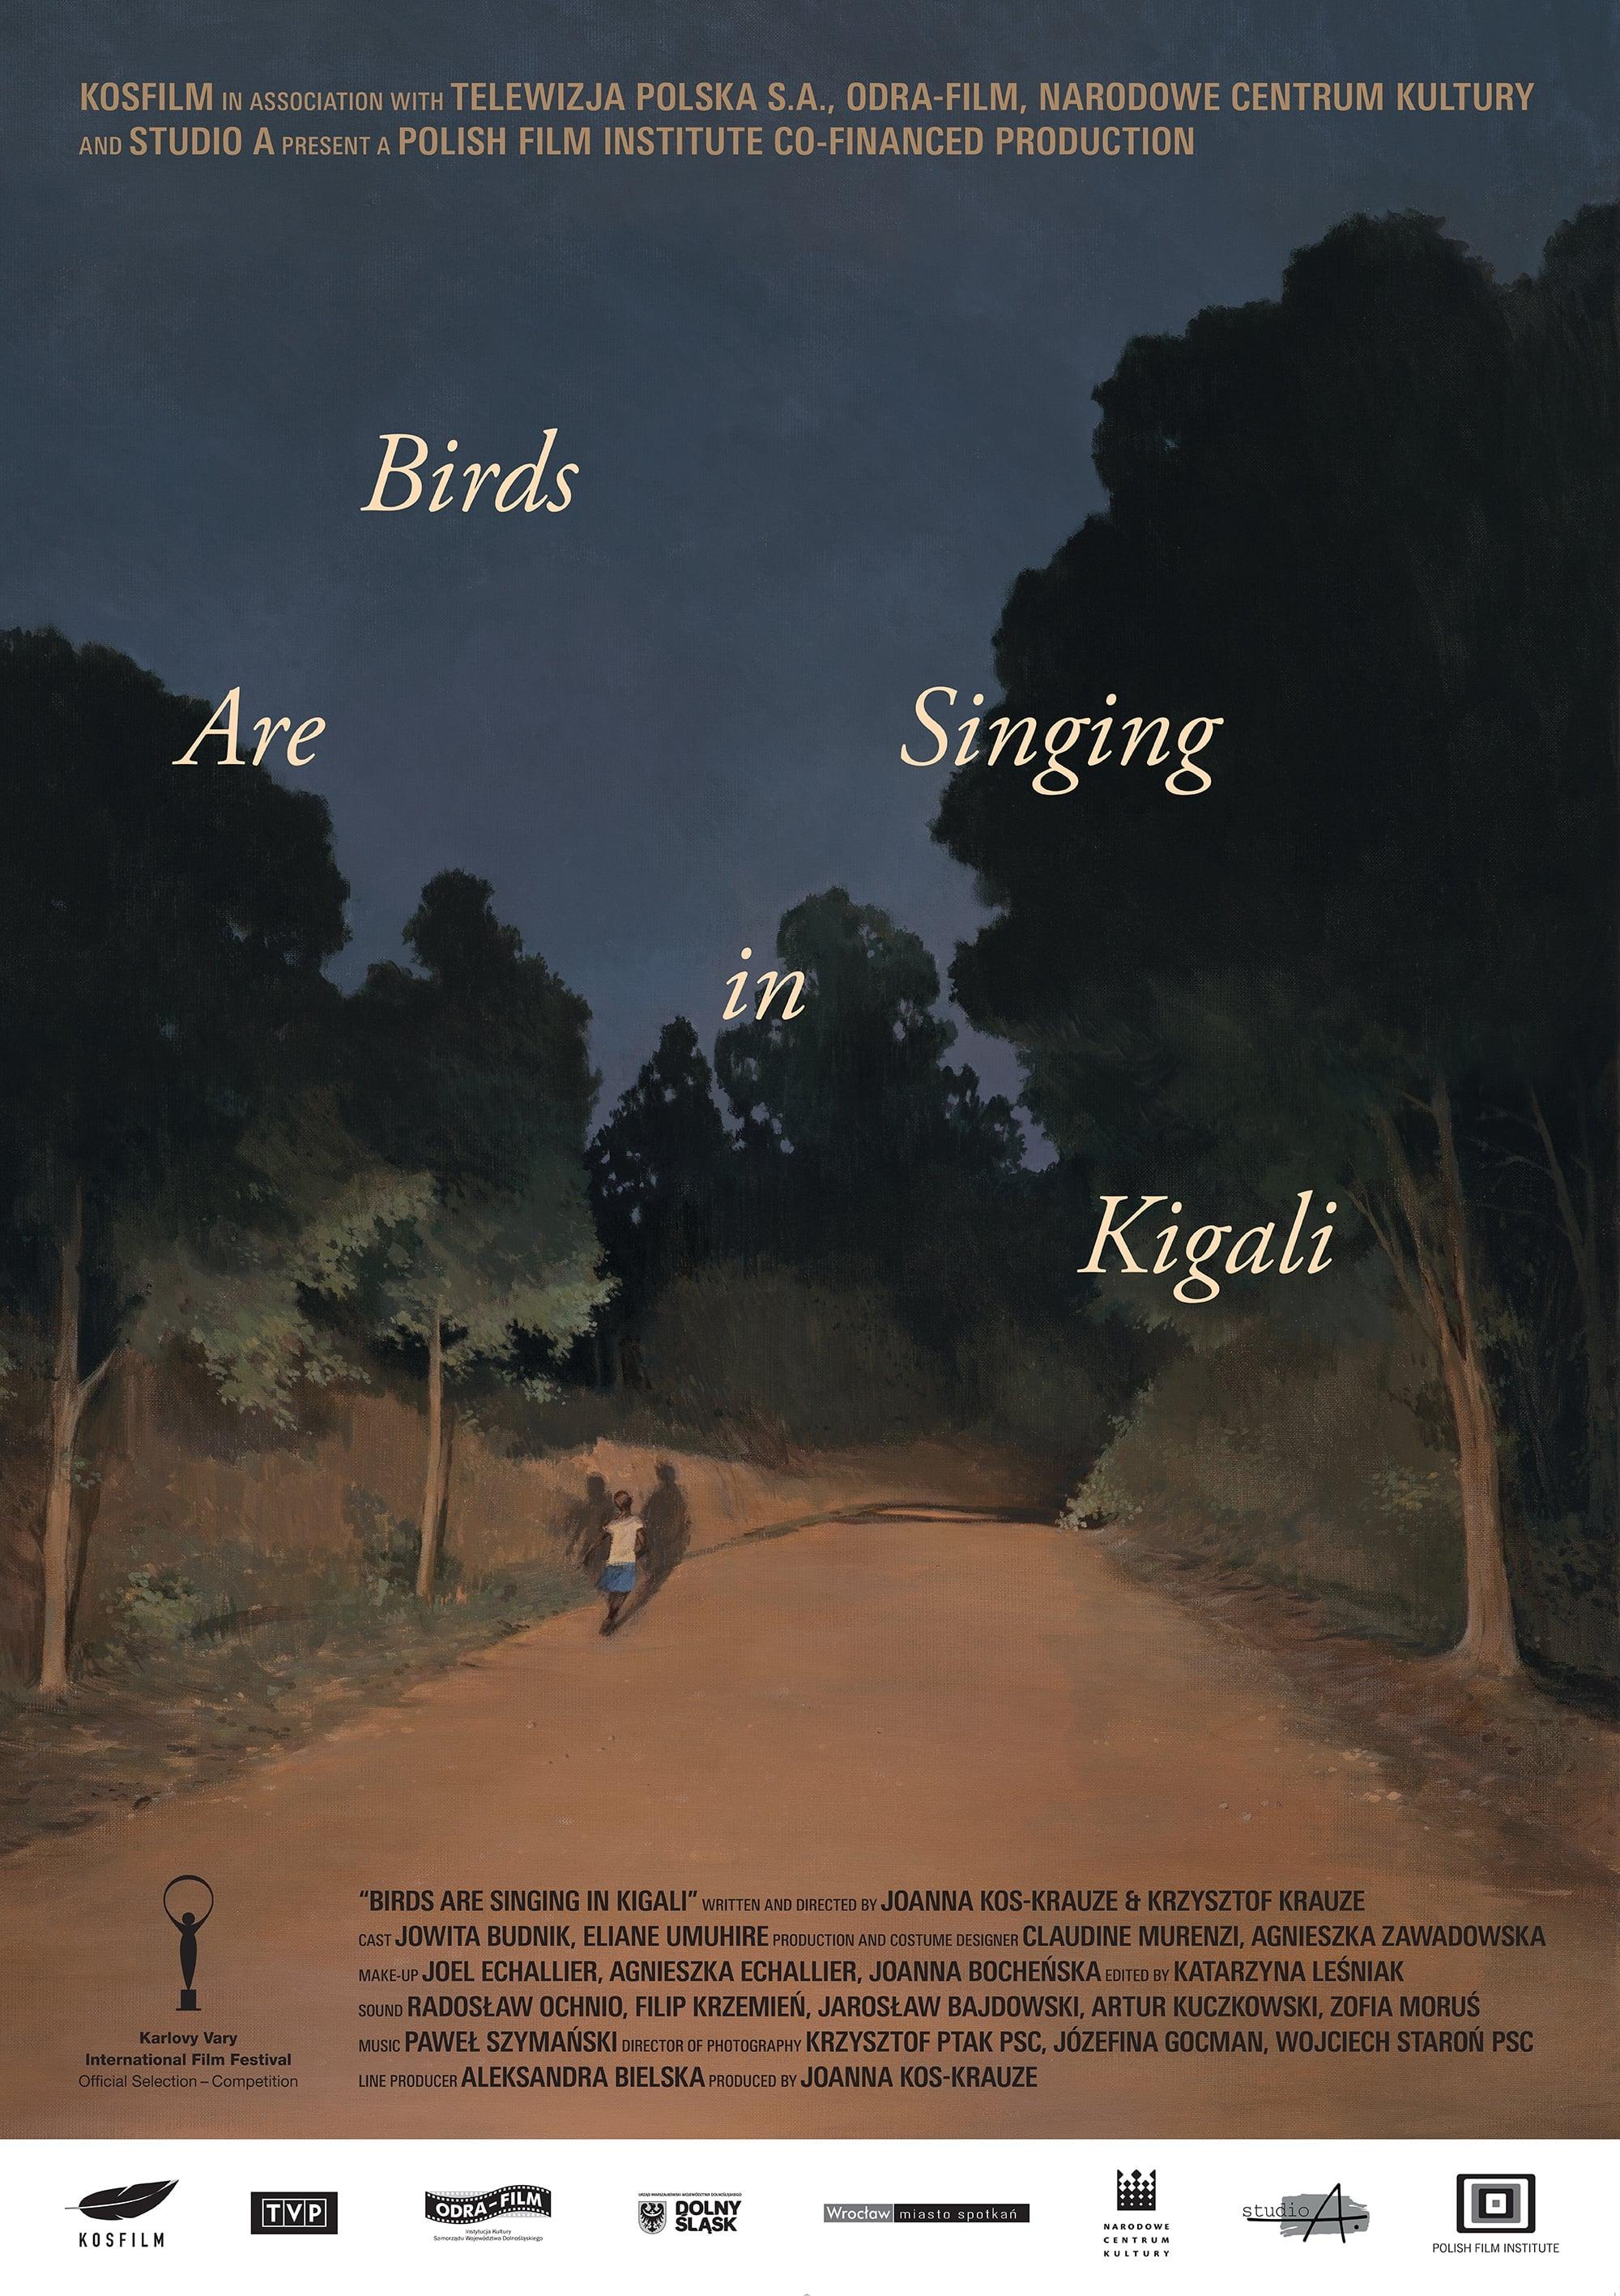 Birds Are Singing in Kigali poster